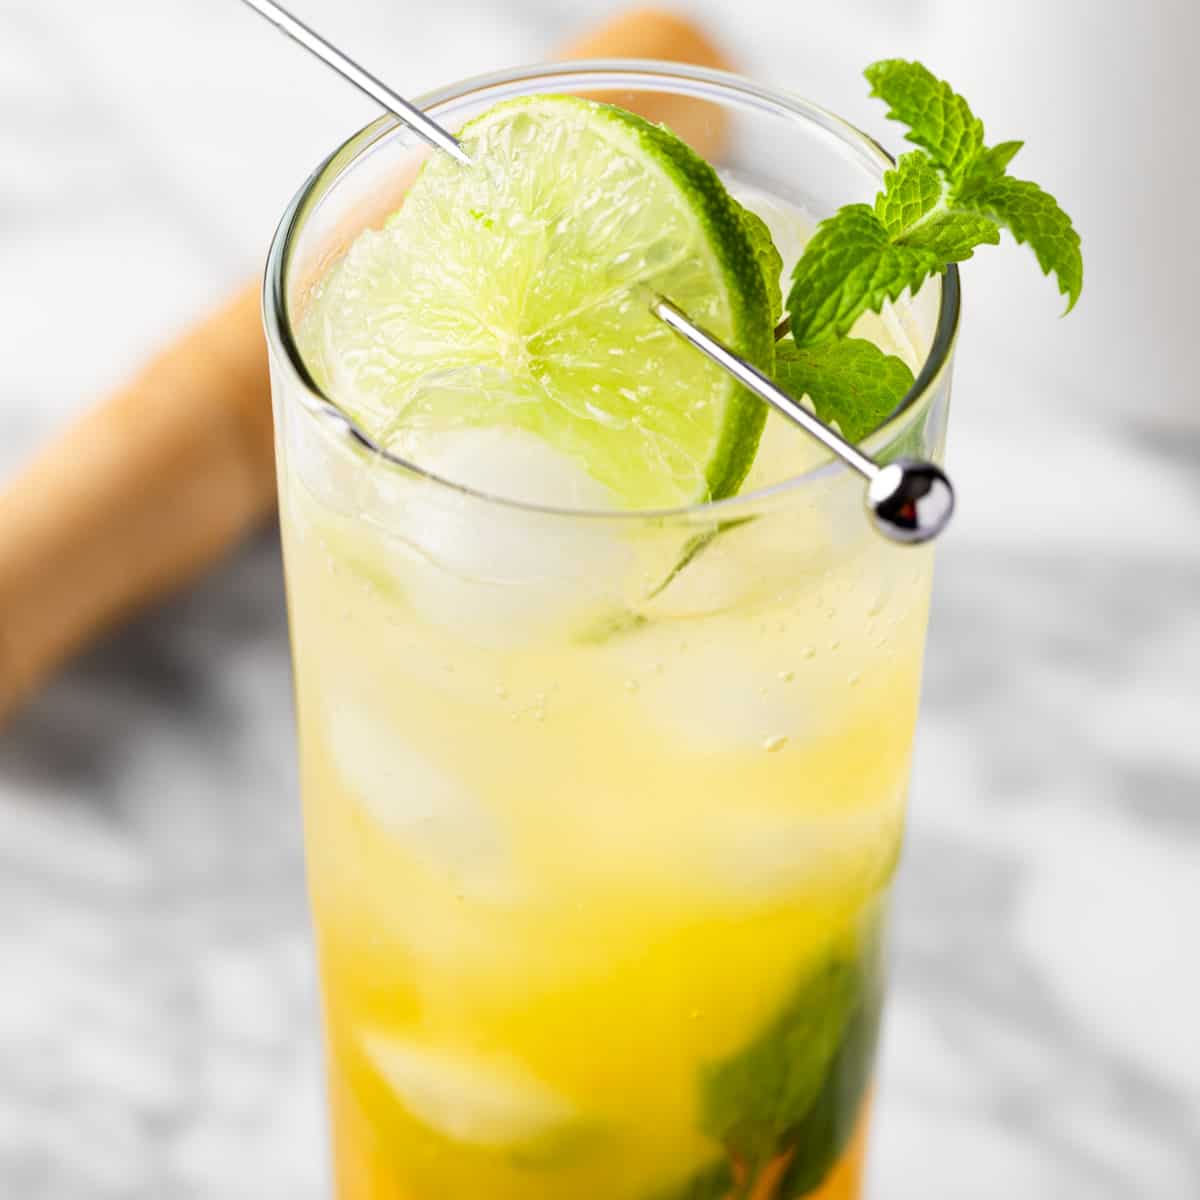 A passionfruit mojito mocktail garnished with a lime wheel and a sprig of mint.